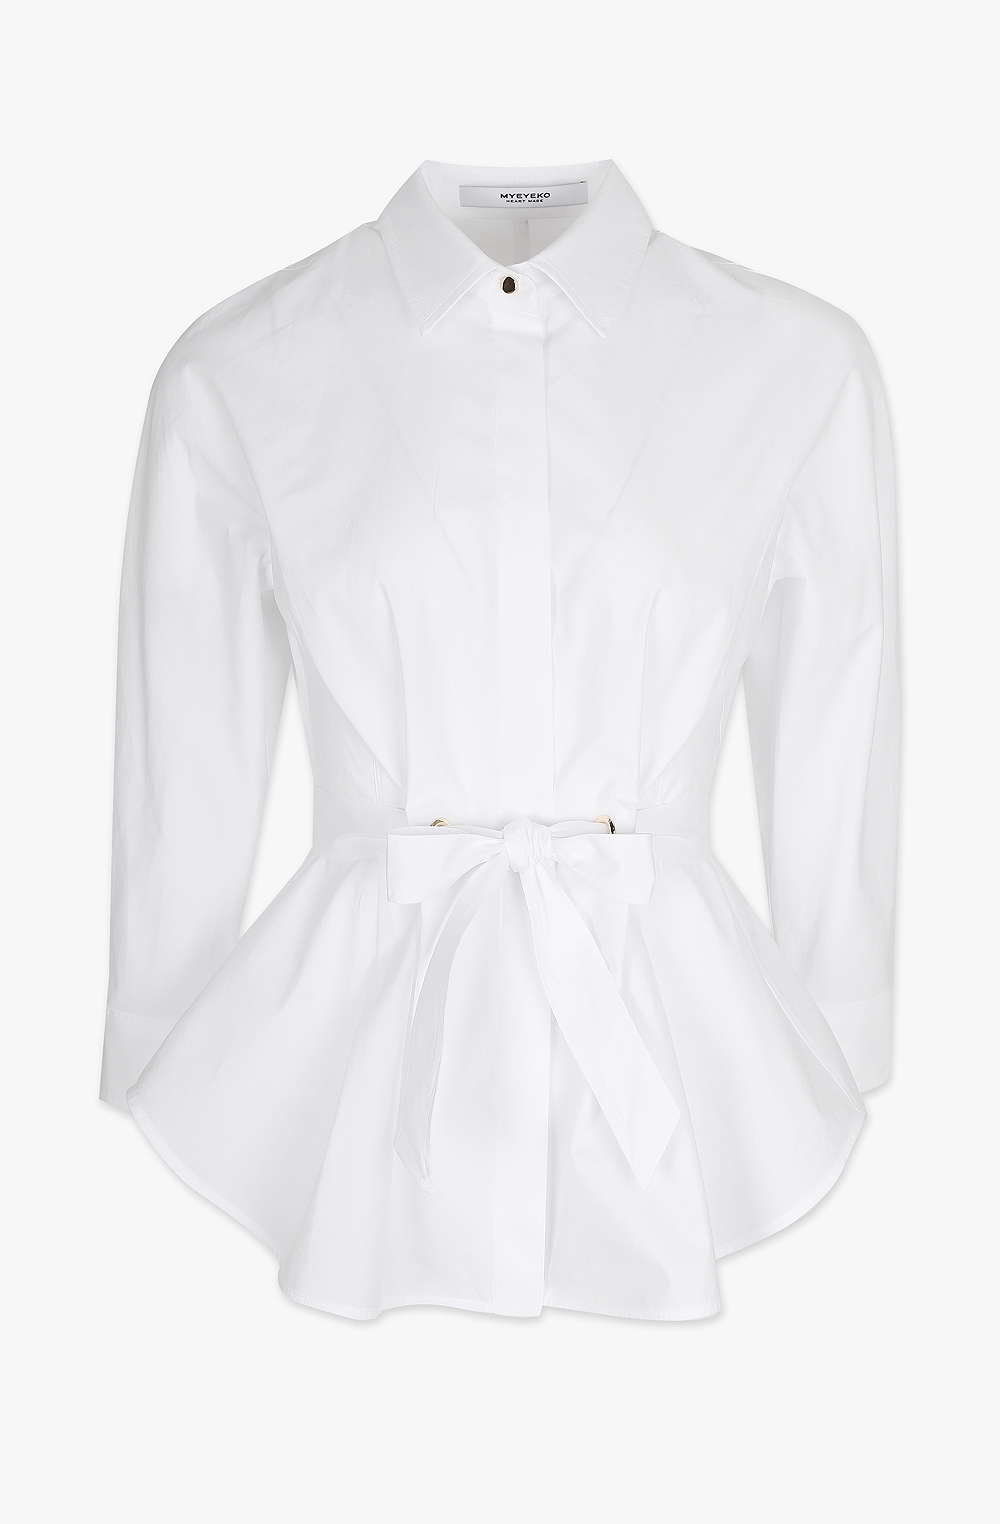 HIGH QUALITY LINE - MYEYEKO 23 SUMMER COLLECTION / COTTON FLARE BELTED SHIRTS (WHITE)